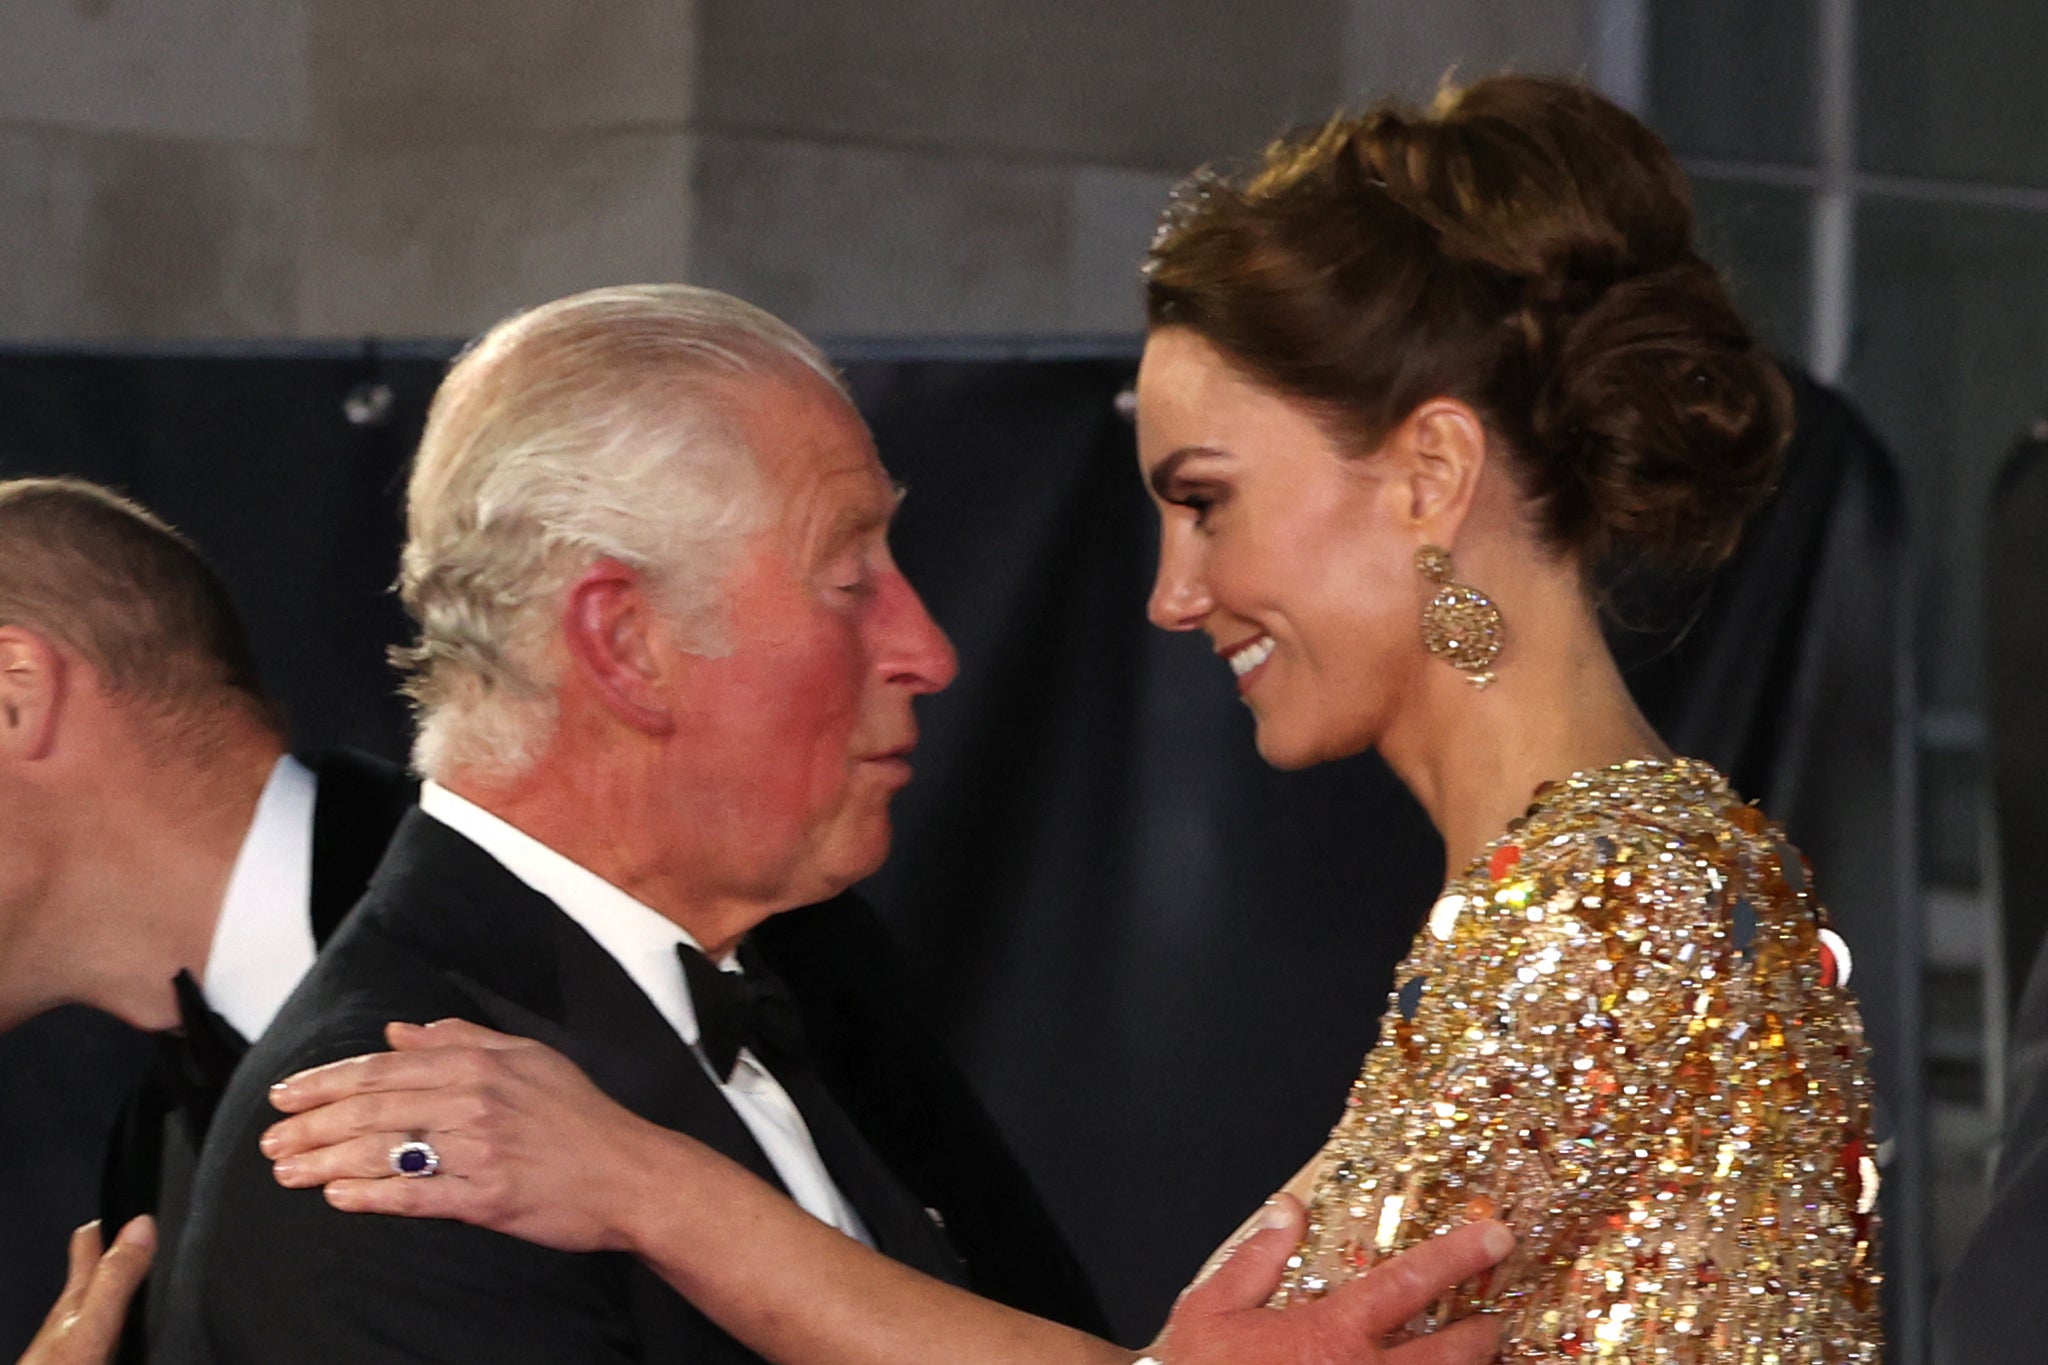 King Charles diagnosed with cancer, Buckingham Palace says